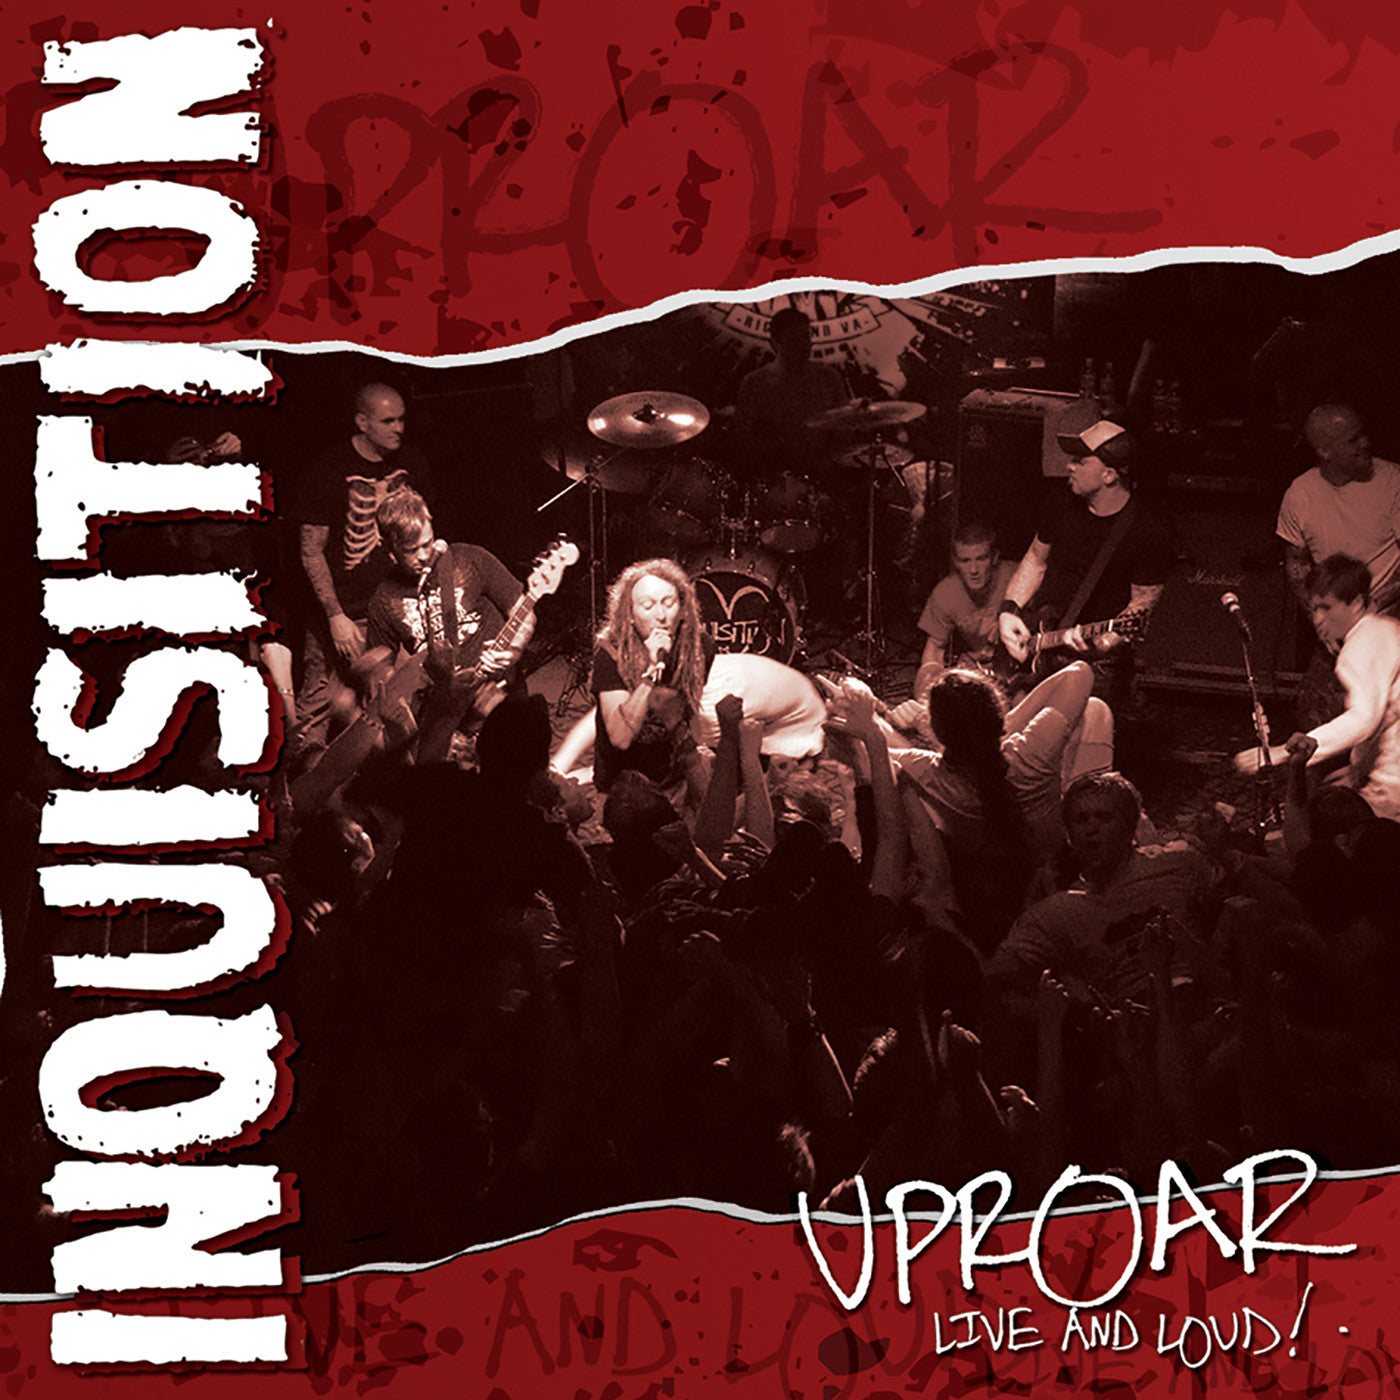 INQUISITION "Uproar: Live and Loud!"